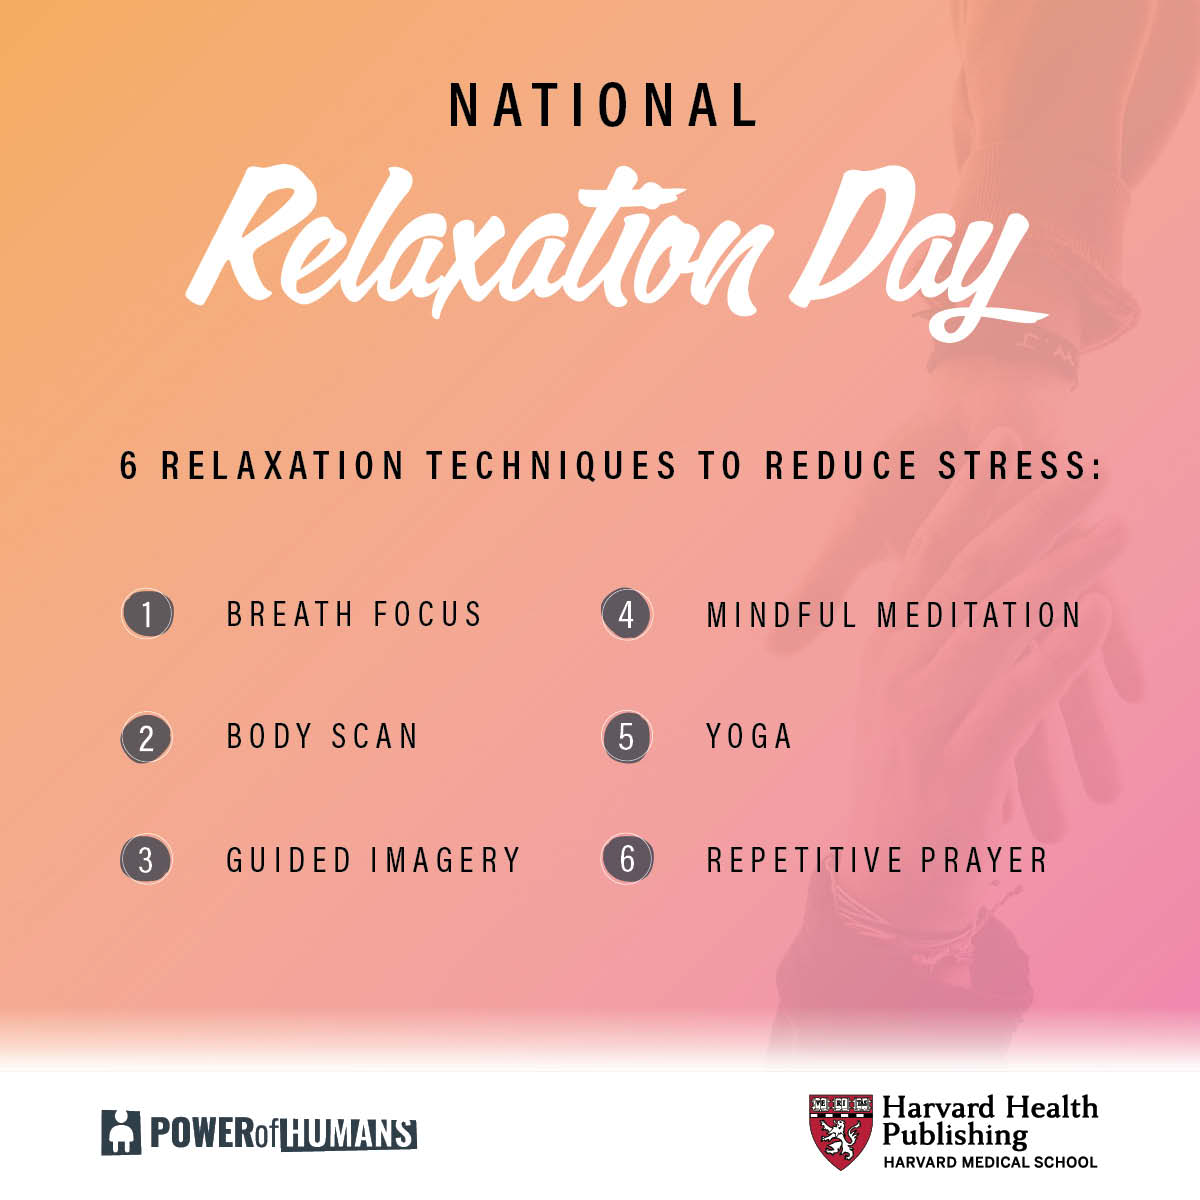 Anxious or stressed? Try progressive muscle relaxation